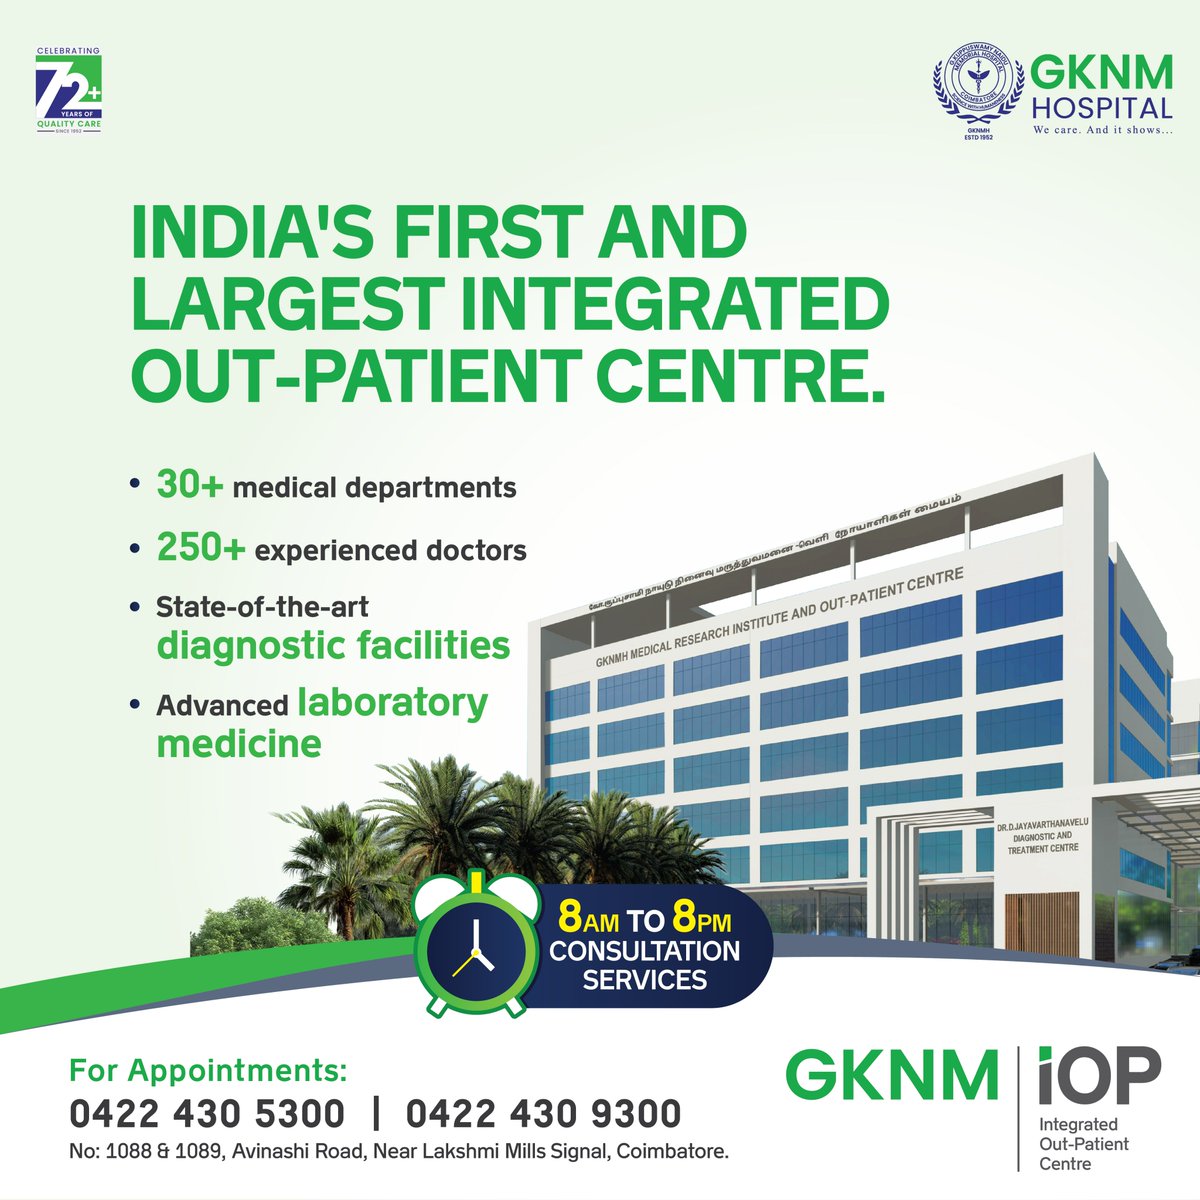 India's first and largest Integrated Outpatient Centre is now in Coimbatore.#GKNMiOP is here to provide you with world-class treatment and care throughout your medical journey! Choose GKNM iOP gknmhospital.org/iop/ / 0422 430 5300 #GKNM #GKNMiOP #iOP #OutPatient #Consultation